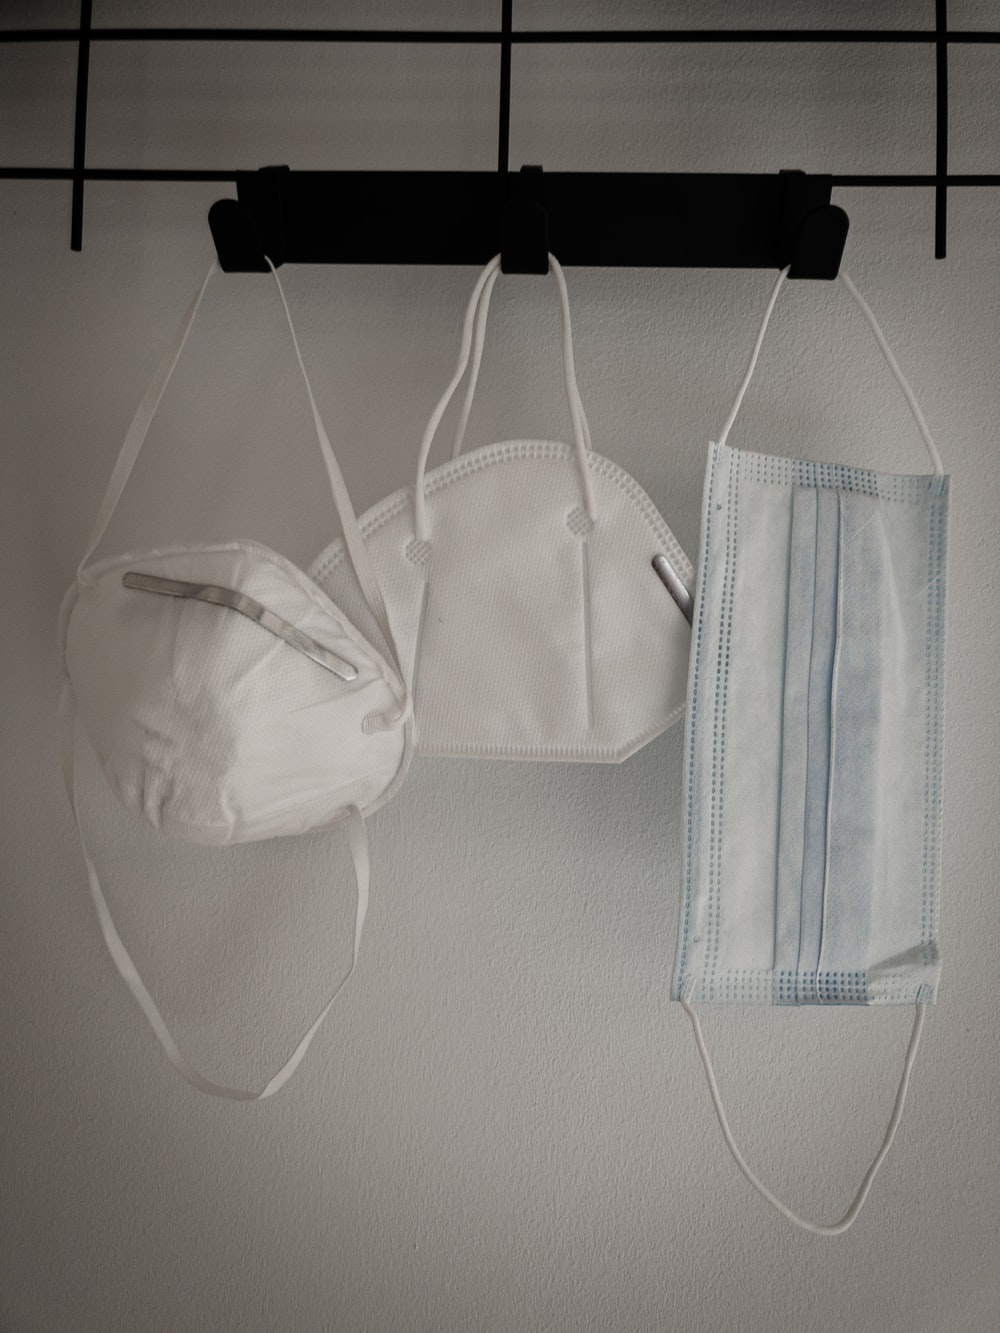 Three white color face masks hanging off a wall hook